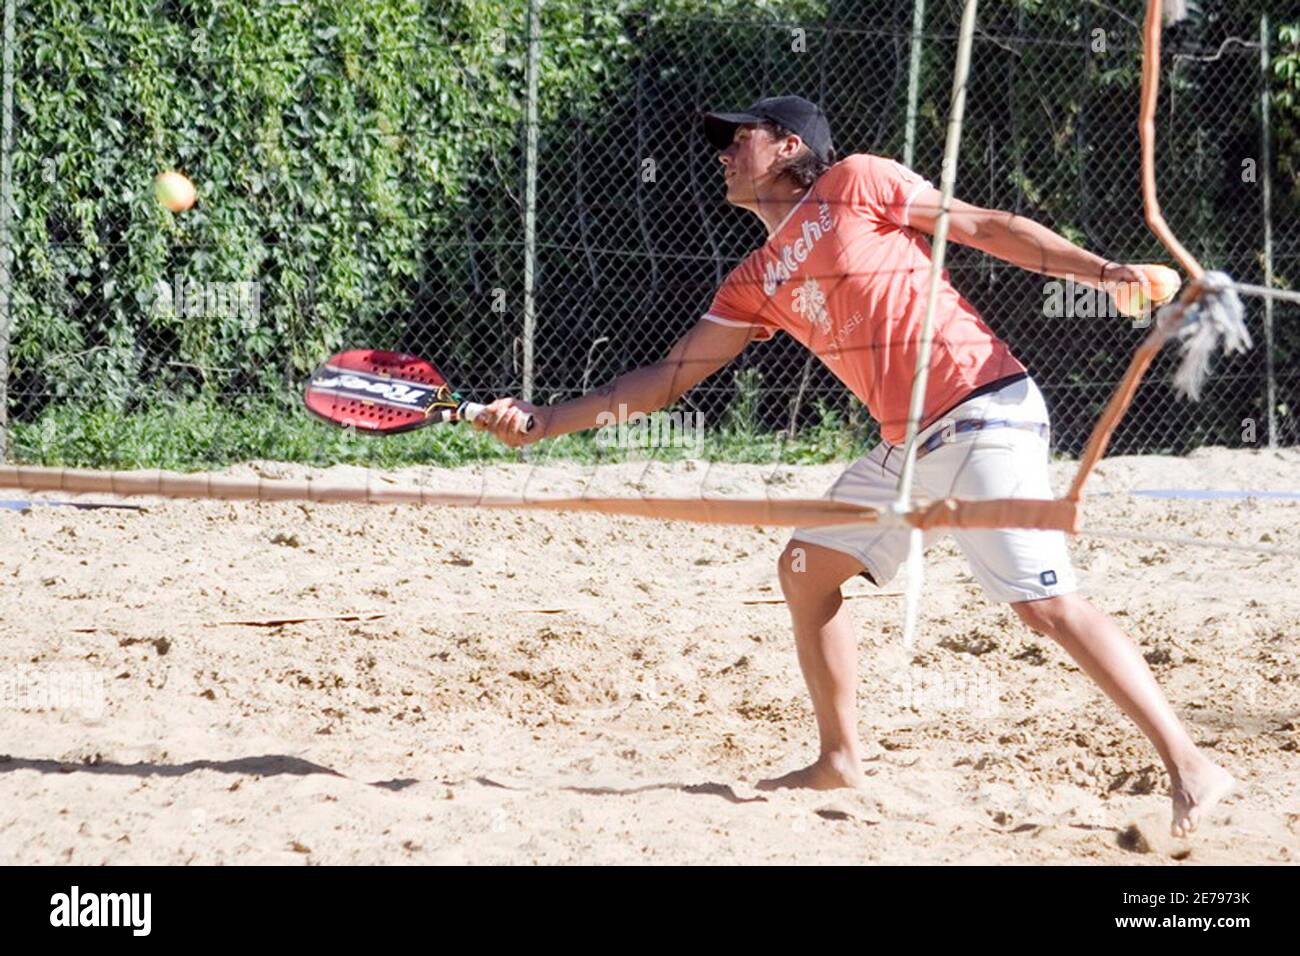 Italian beach tennis champion Paolo Tazzari in action at Quanta Sport  Village Leisure Centre, Milan in this picture taken July 5, 2007. The  growing sport of beach tennis is ready to further